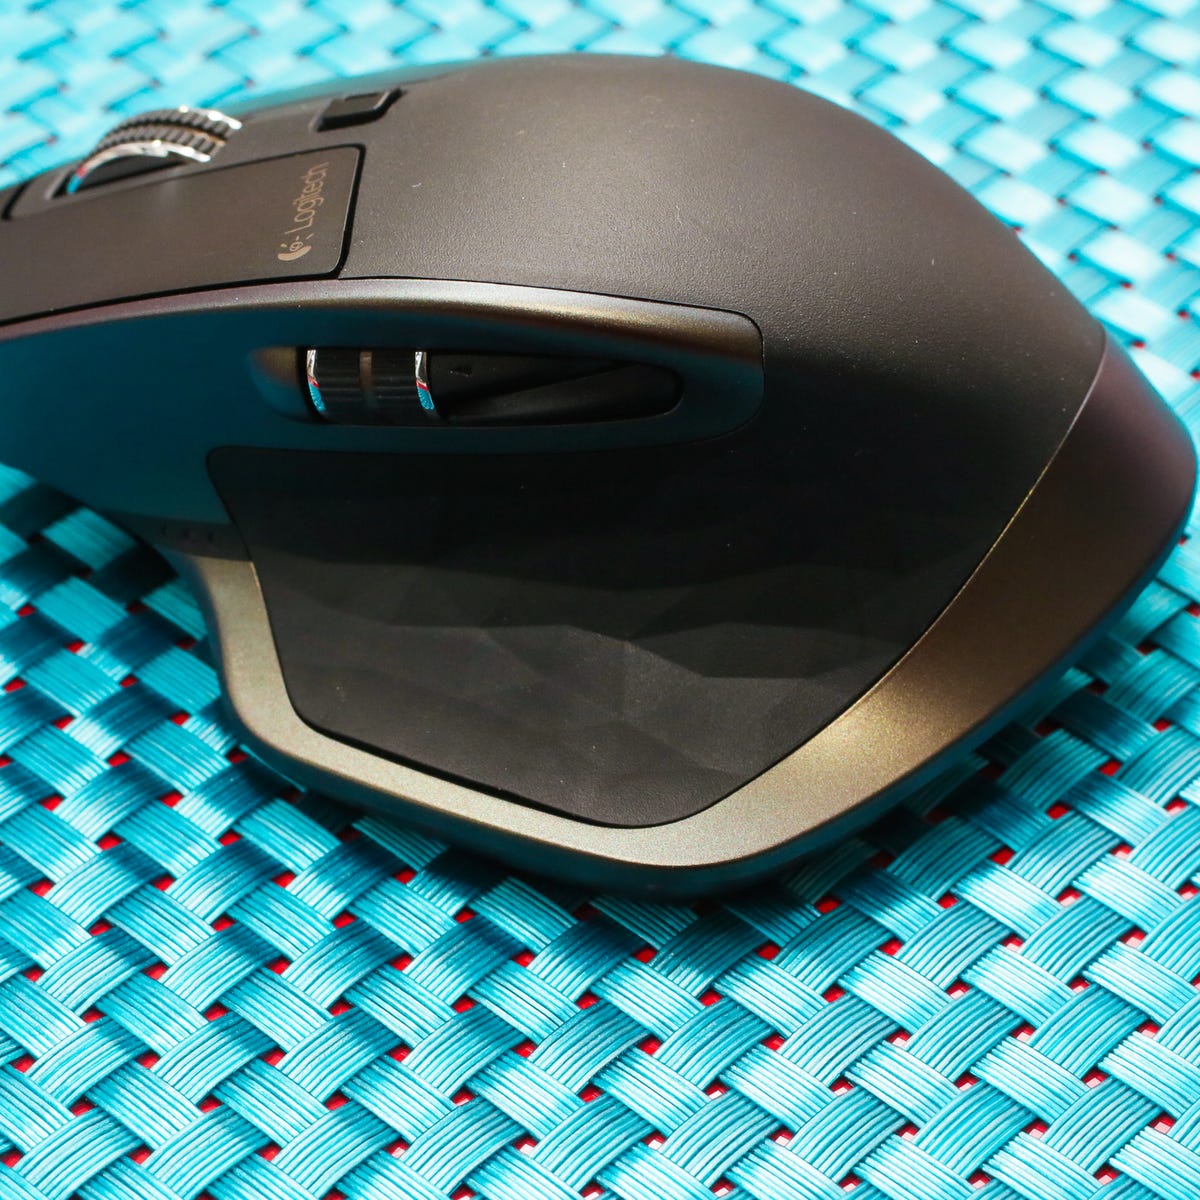 Logitech MX Master review: One smooth, feature-packed wireless